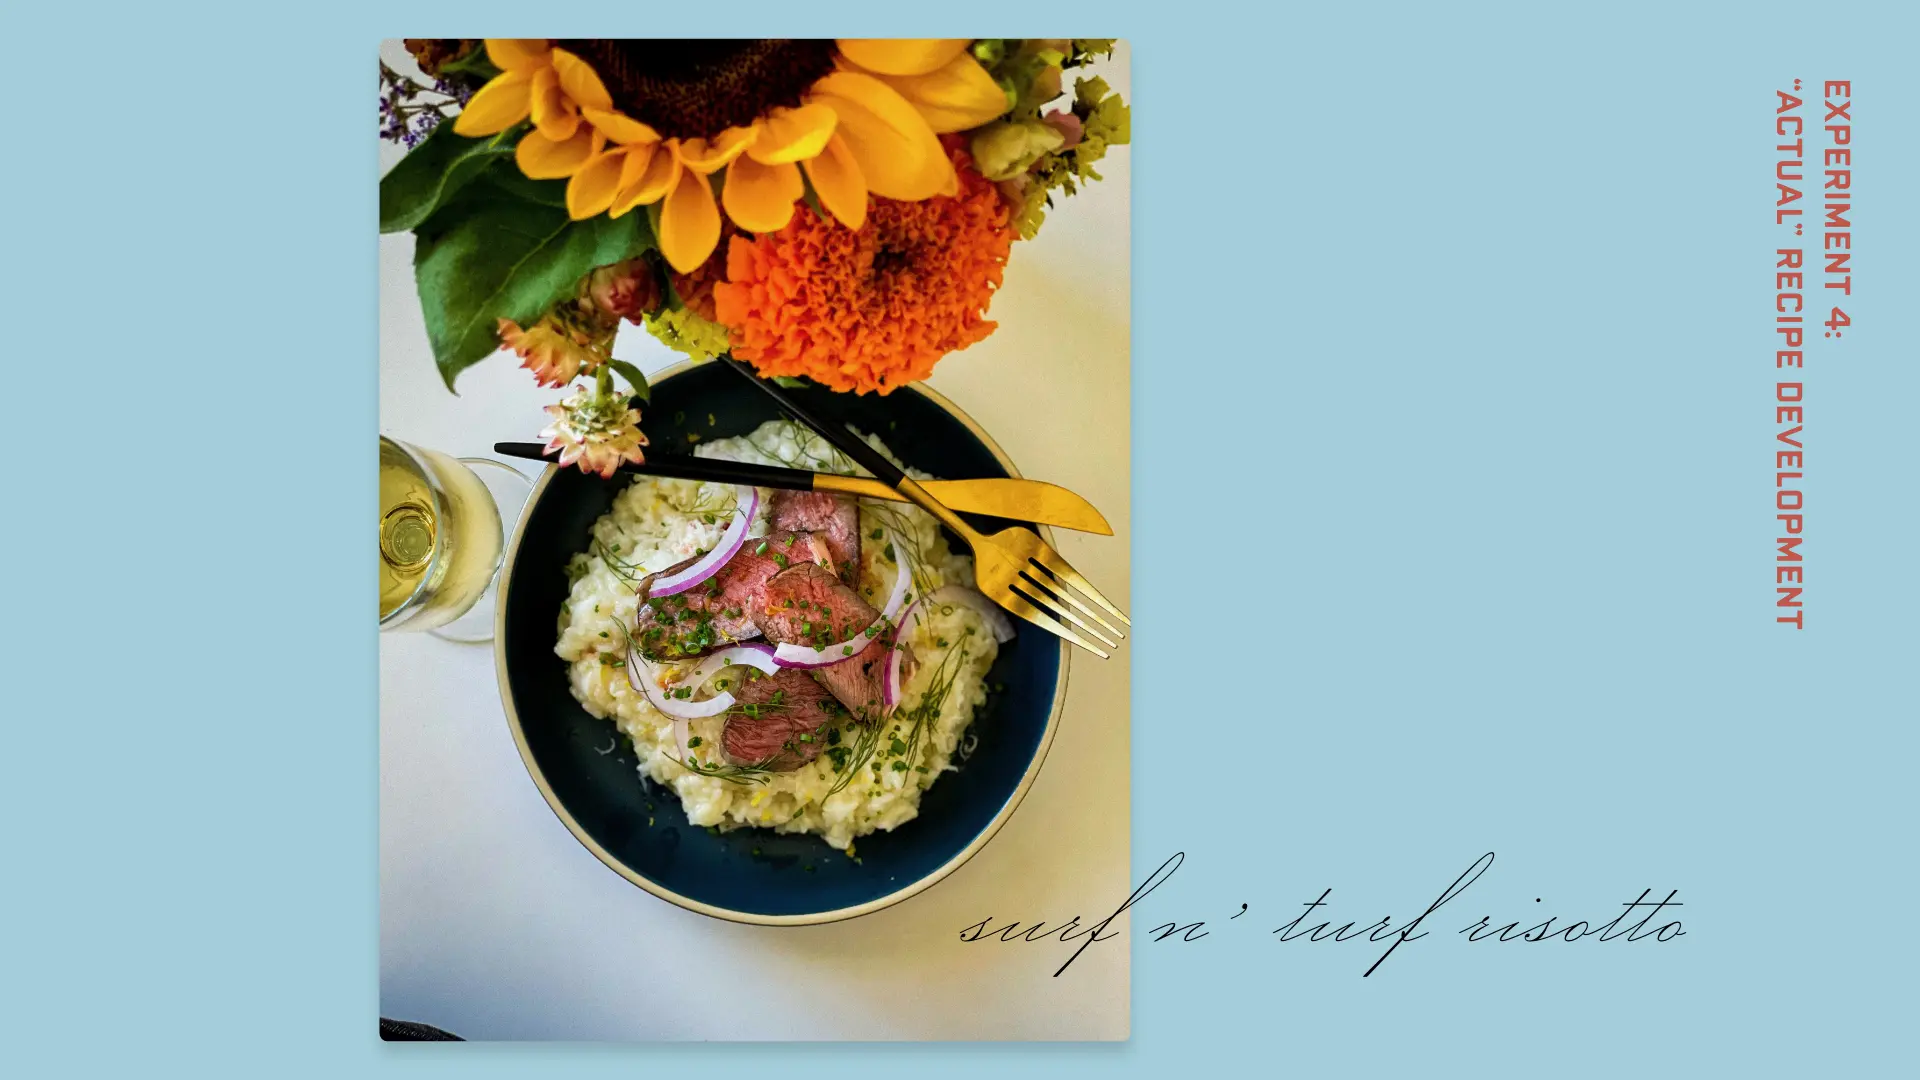 A photograph of a place setting on a light blue background. A glass of wine, a flower arrangement, and a knife and fork resting on the edge of a bowl of risotto topped with sliced beef.